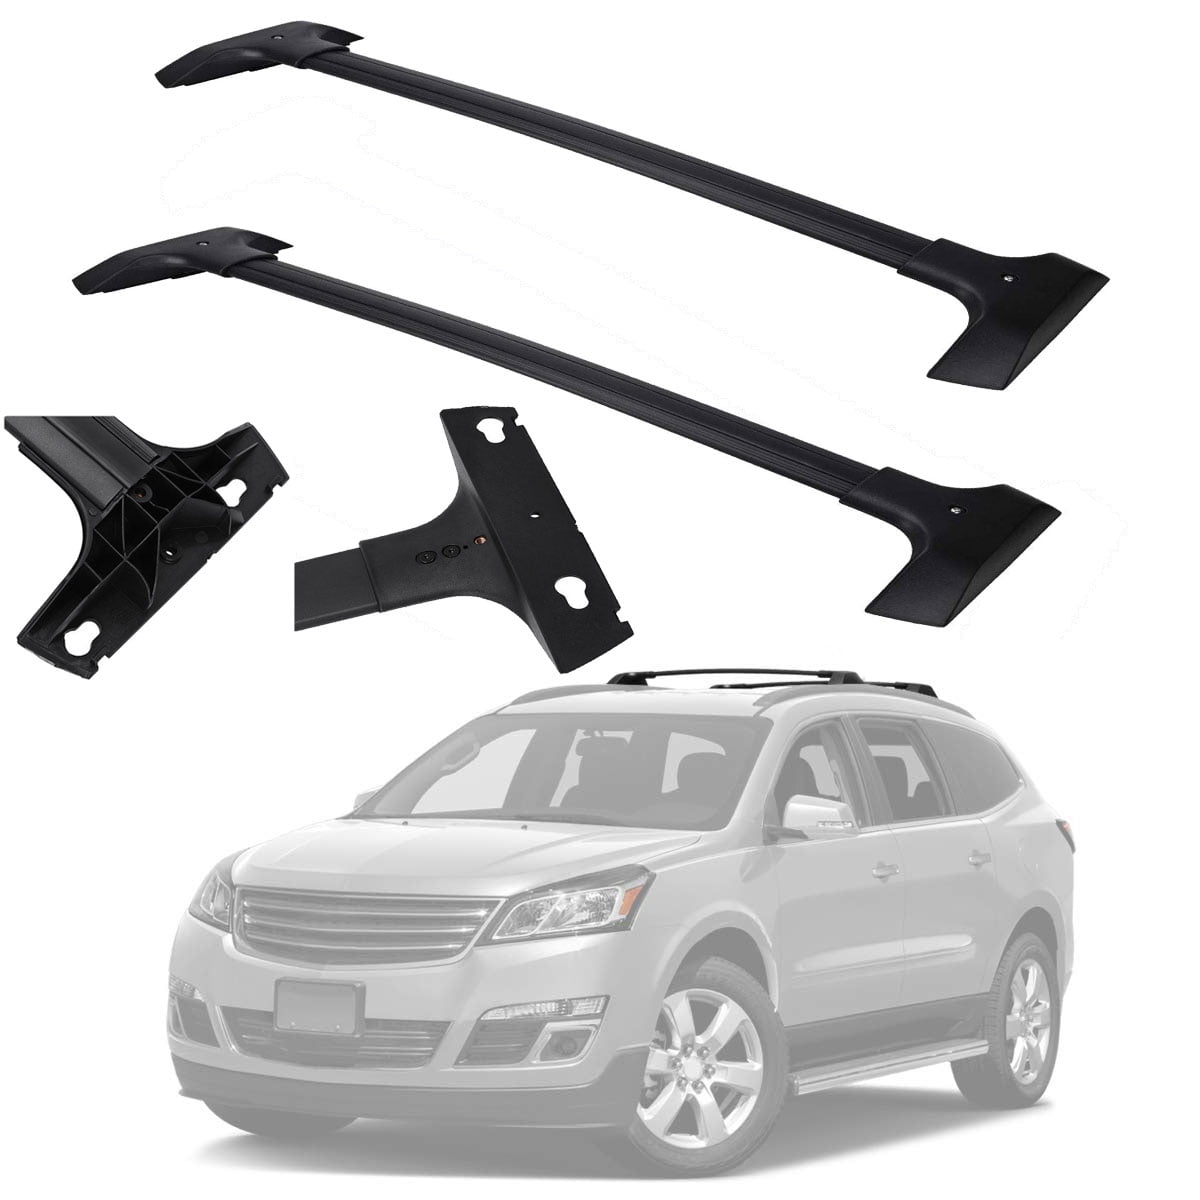 2017 Chevy Traverse Roof Rack C Channel